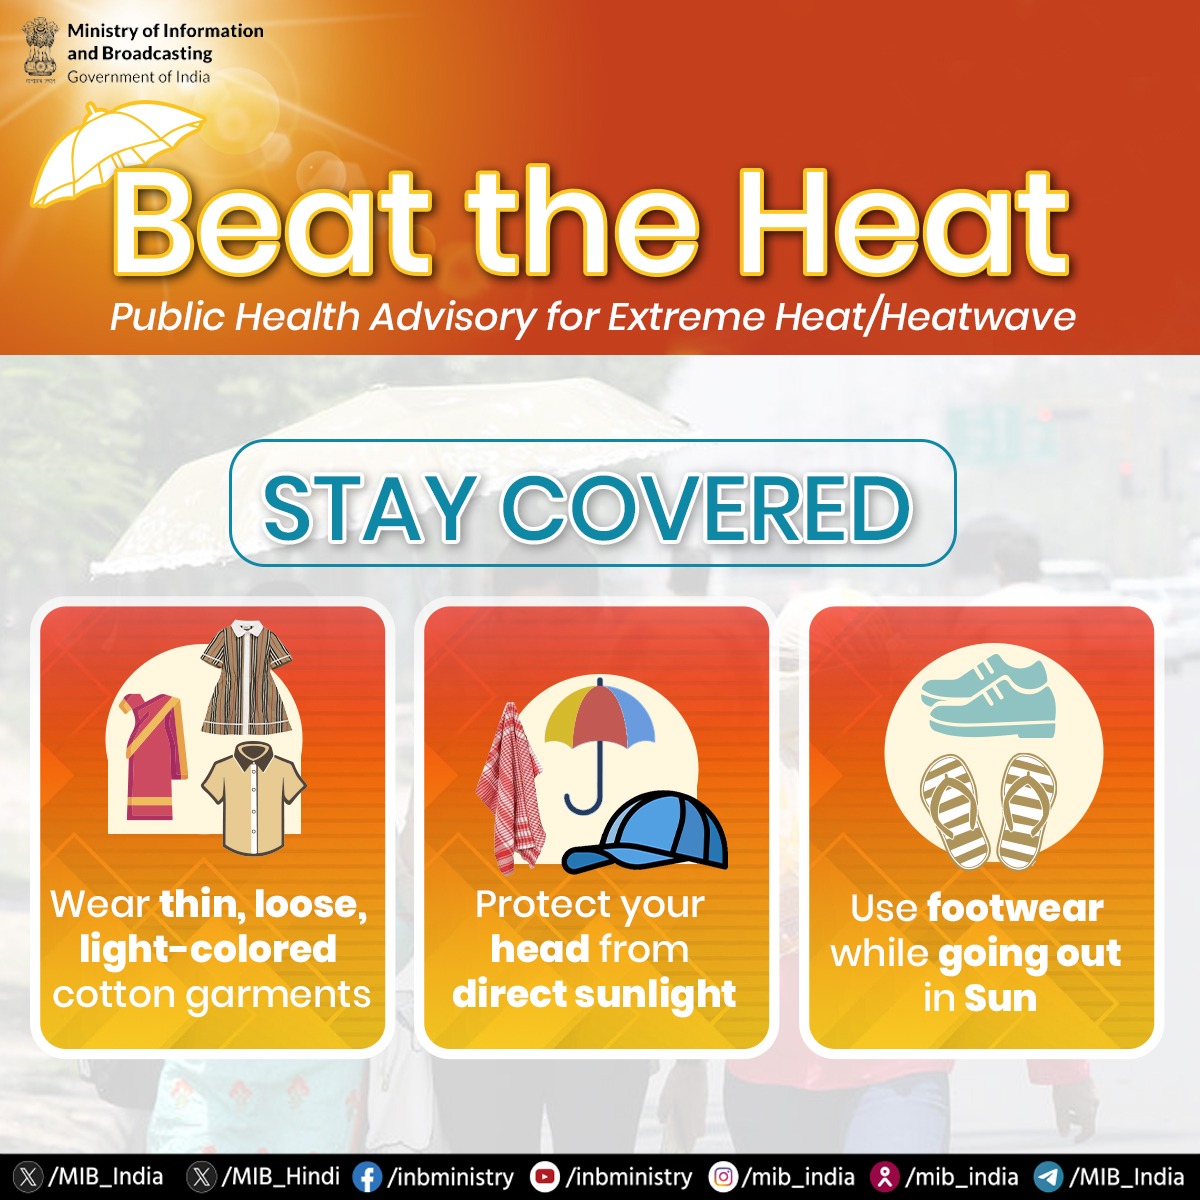 #HeatWave: Beat the Heat! 📝Public Health Advisory for Extreme Heat/Heatwave☀️ ➡️Stay Covered: 💠Wear thin, loose, light-colored cotton garments👕🥻 💠Protect your head from direct sunlight🧢🌂 💠Use footwear while going out in Sun🩴👟 Stay safe & be #WeatherReady!…